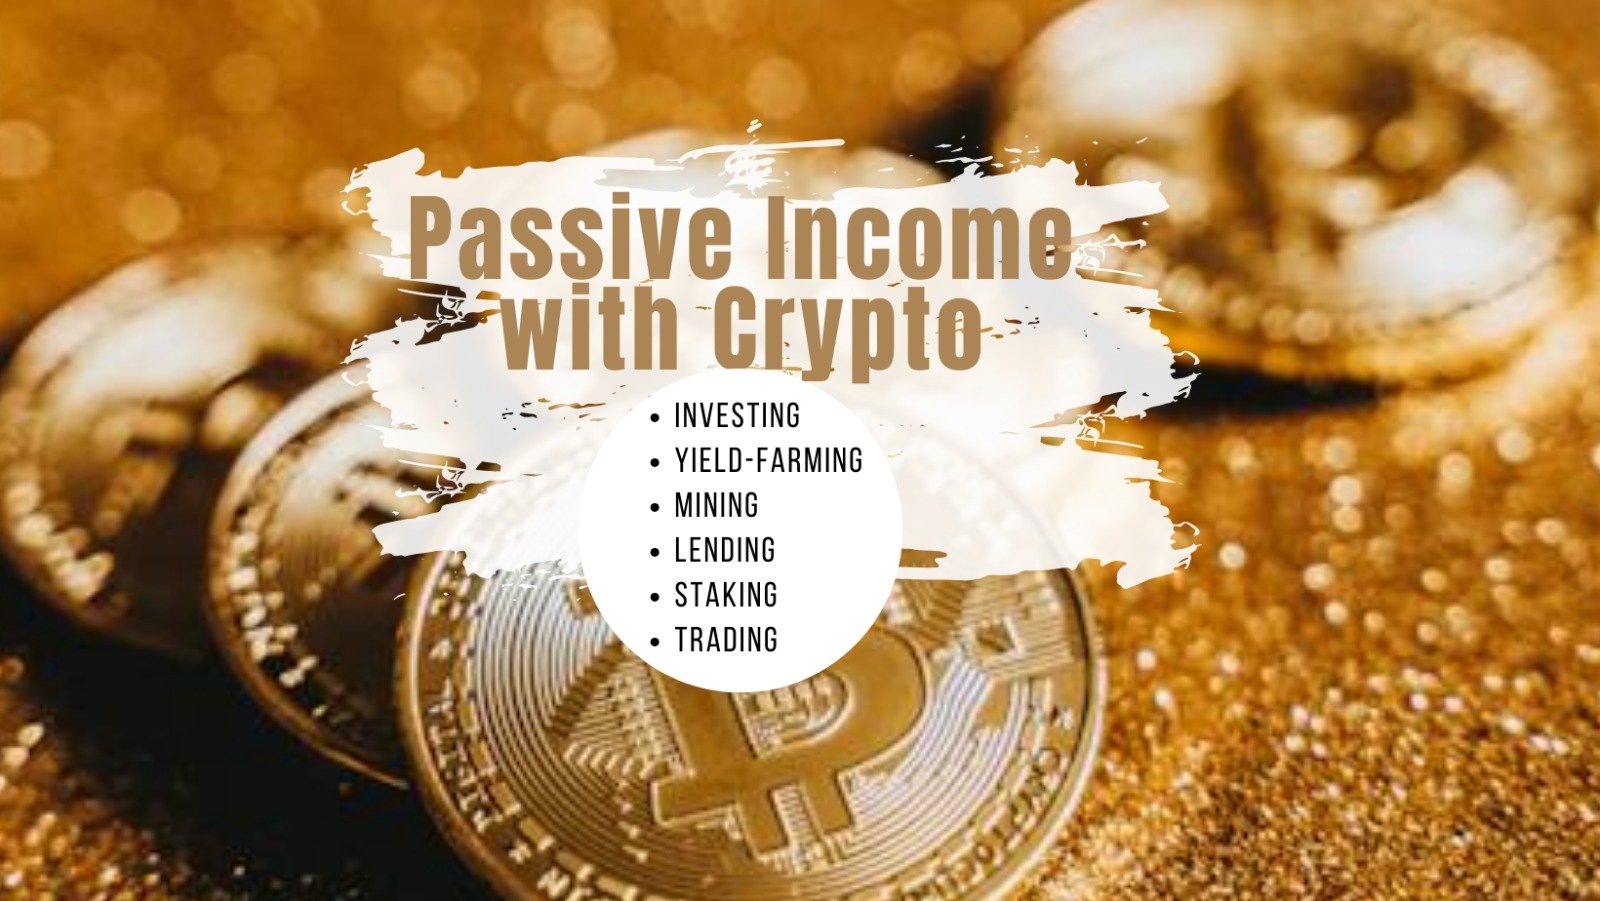 How to Earn Passive Income with Crypto? #9 Best Strategies